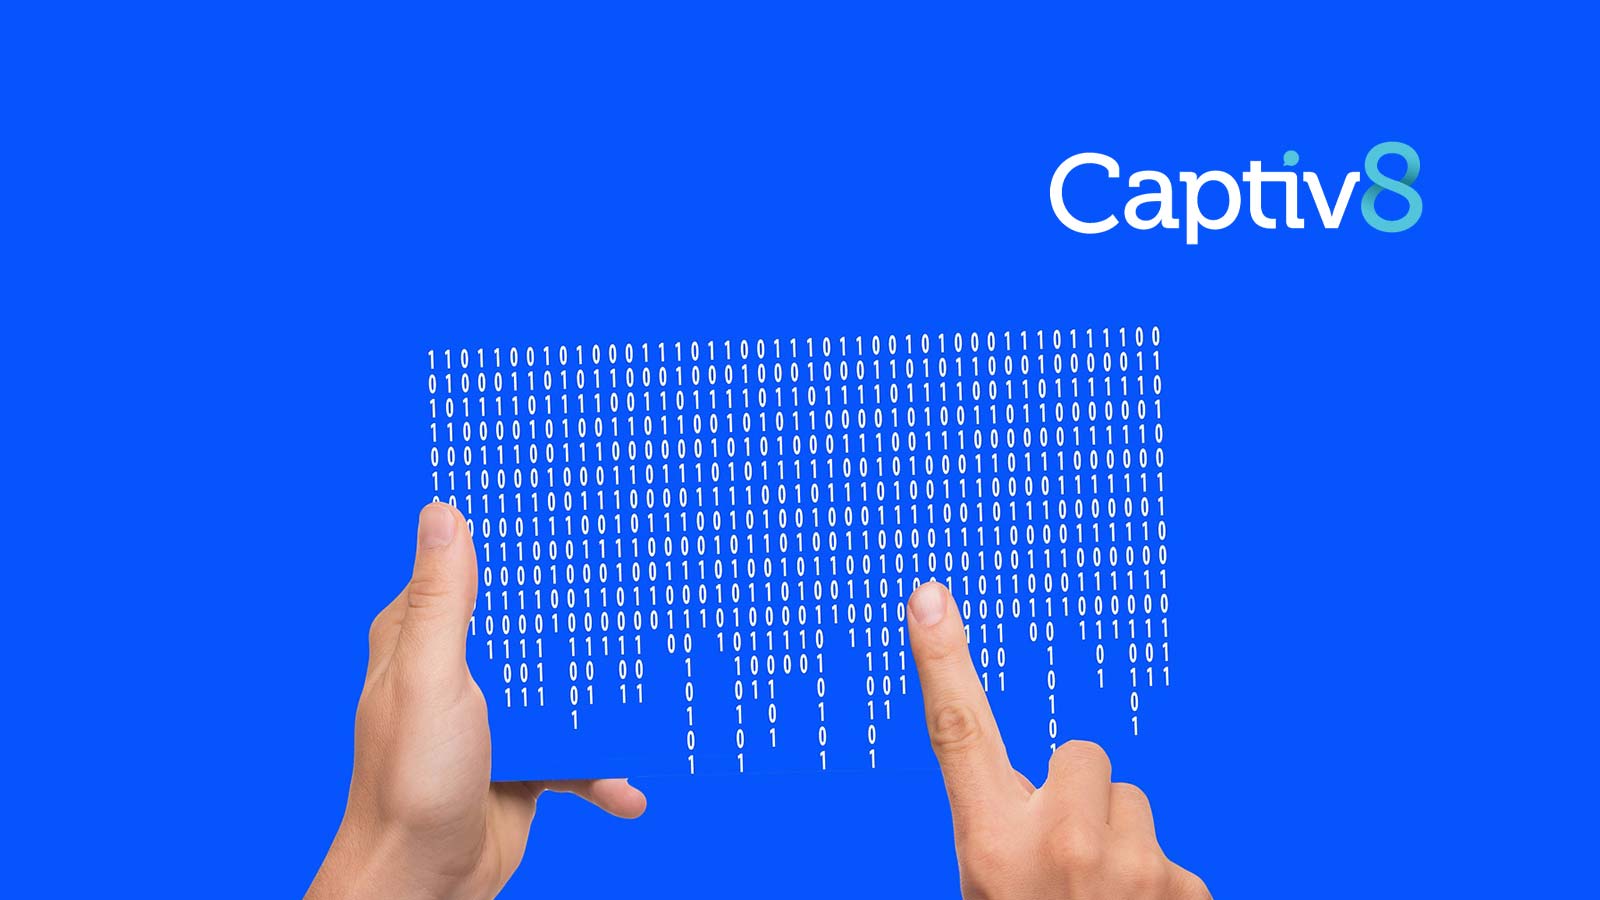 Captiv8 Makes Influencer Marketing More Accessible By Offering Pro-Bono Services to BIPOC and LGBTQIA+ Owned SMBs Through its Influence Change Grant